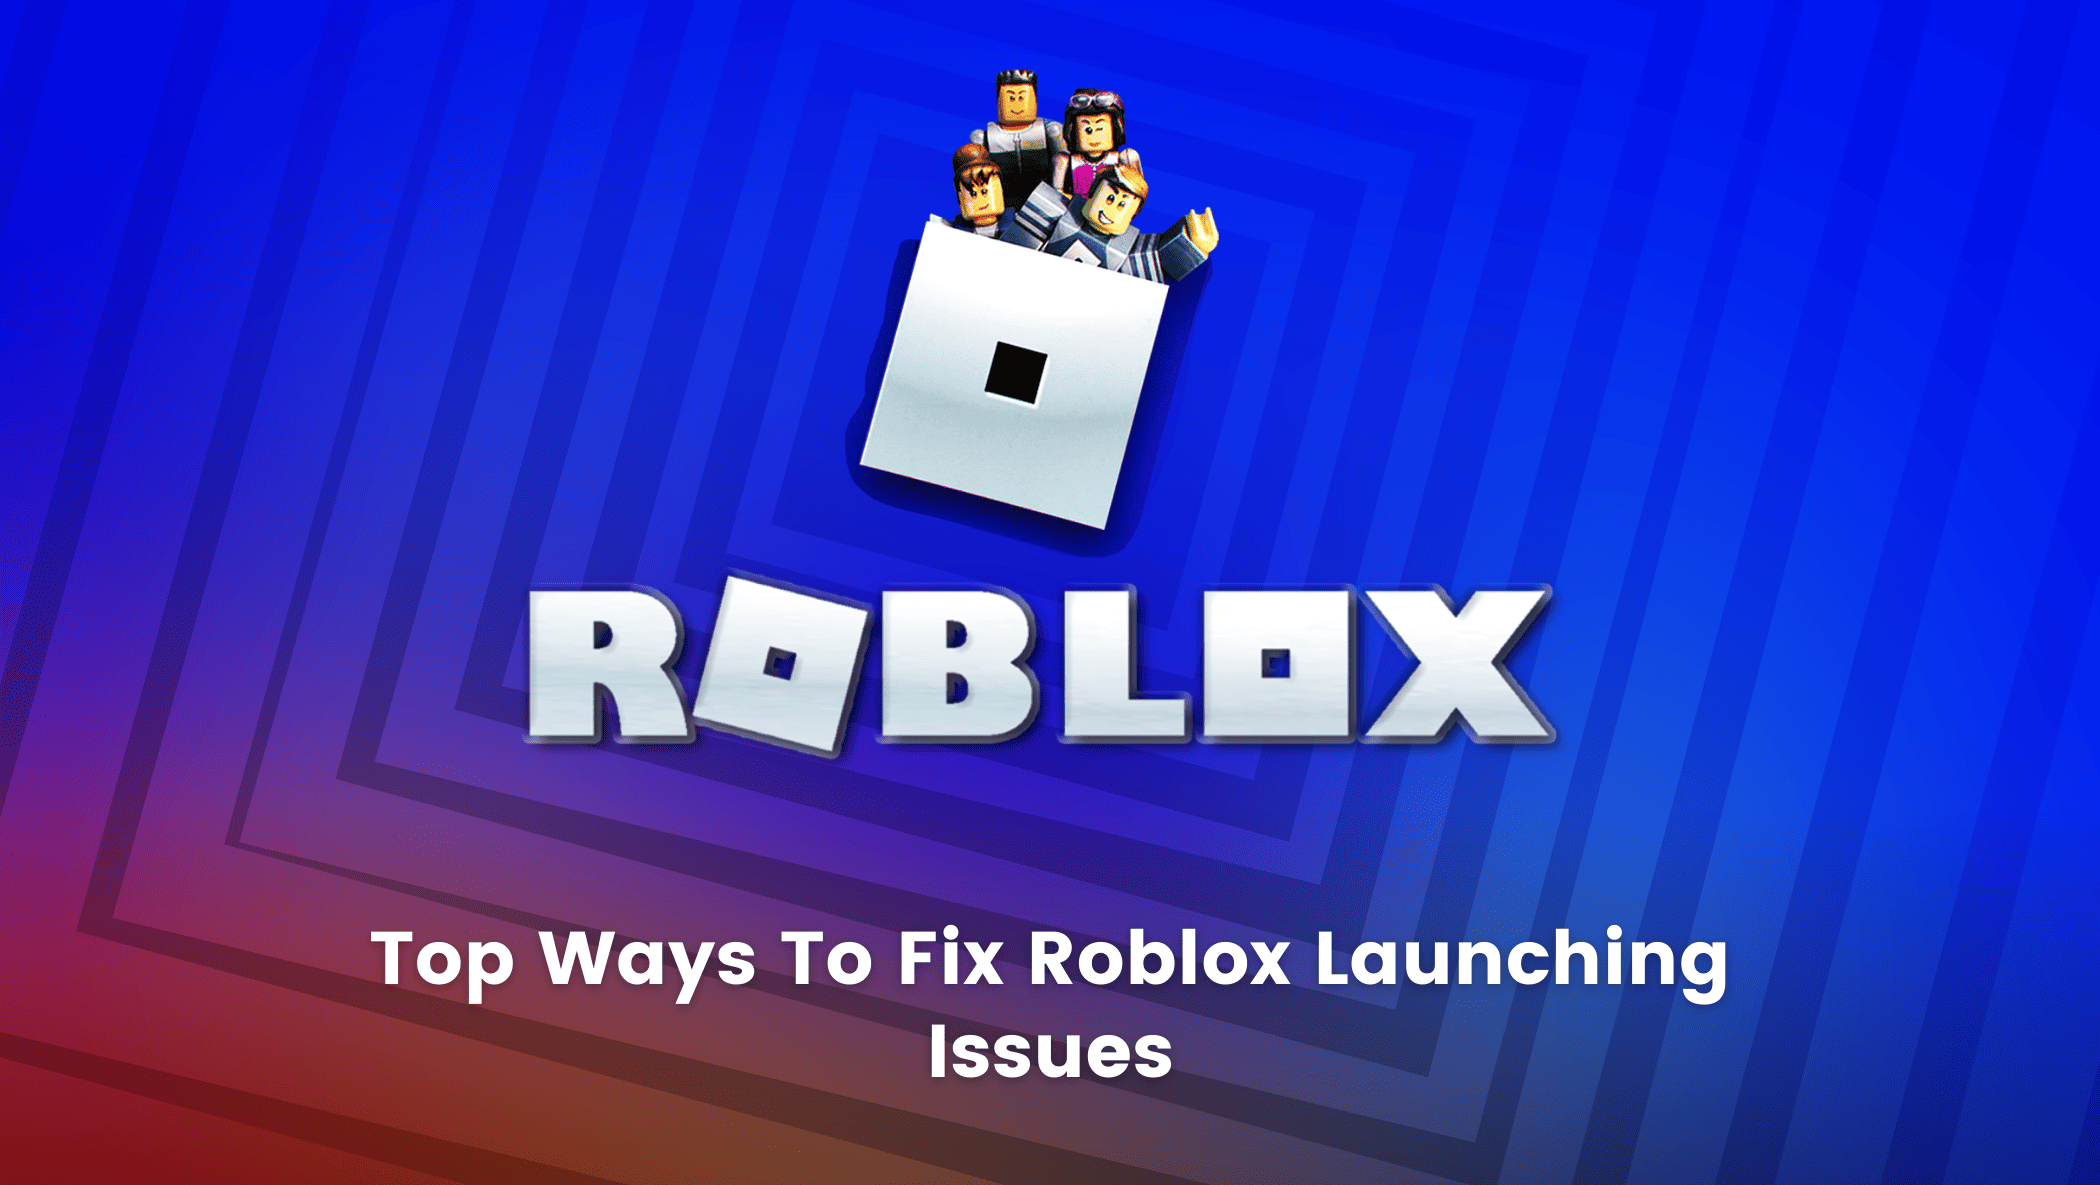 Top Ways To Fix Roblox Launching Issues